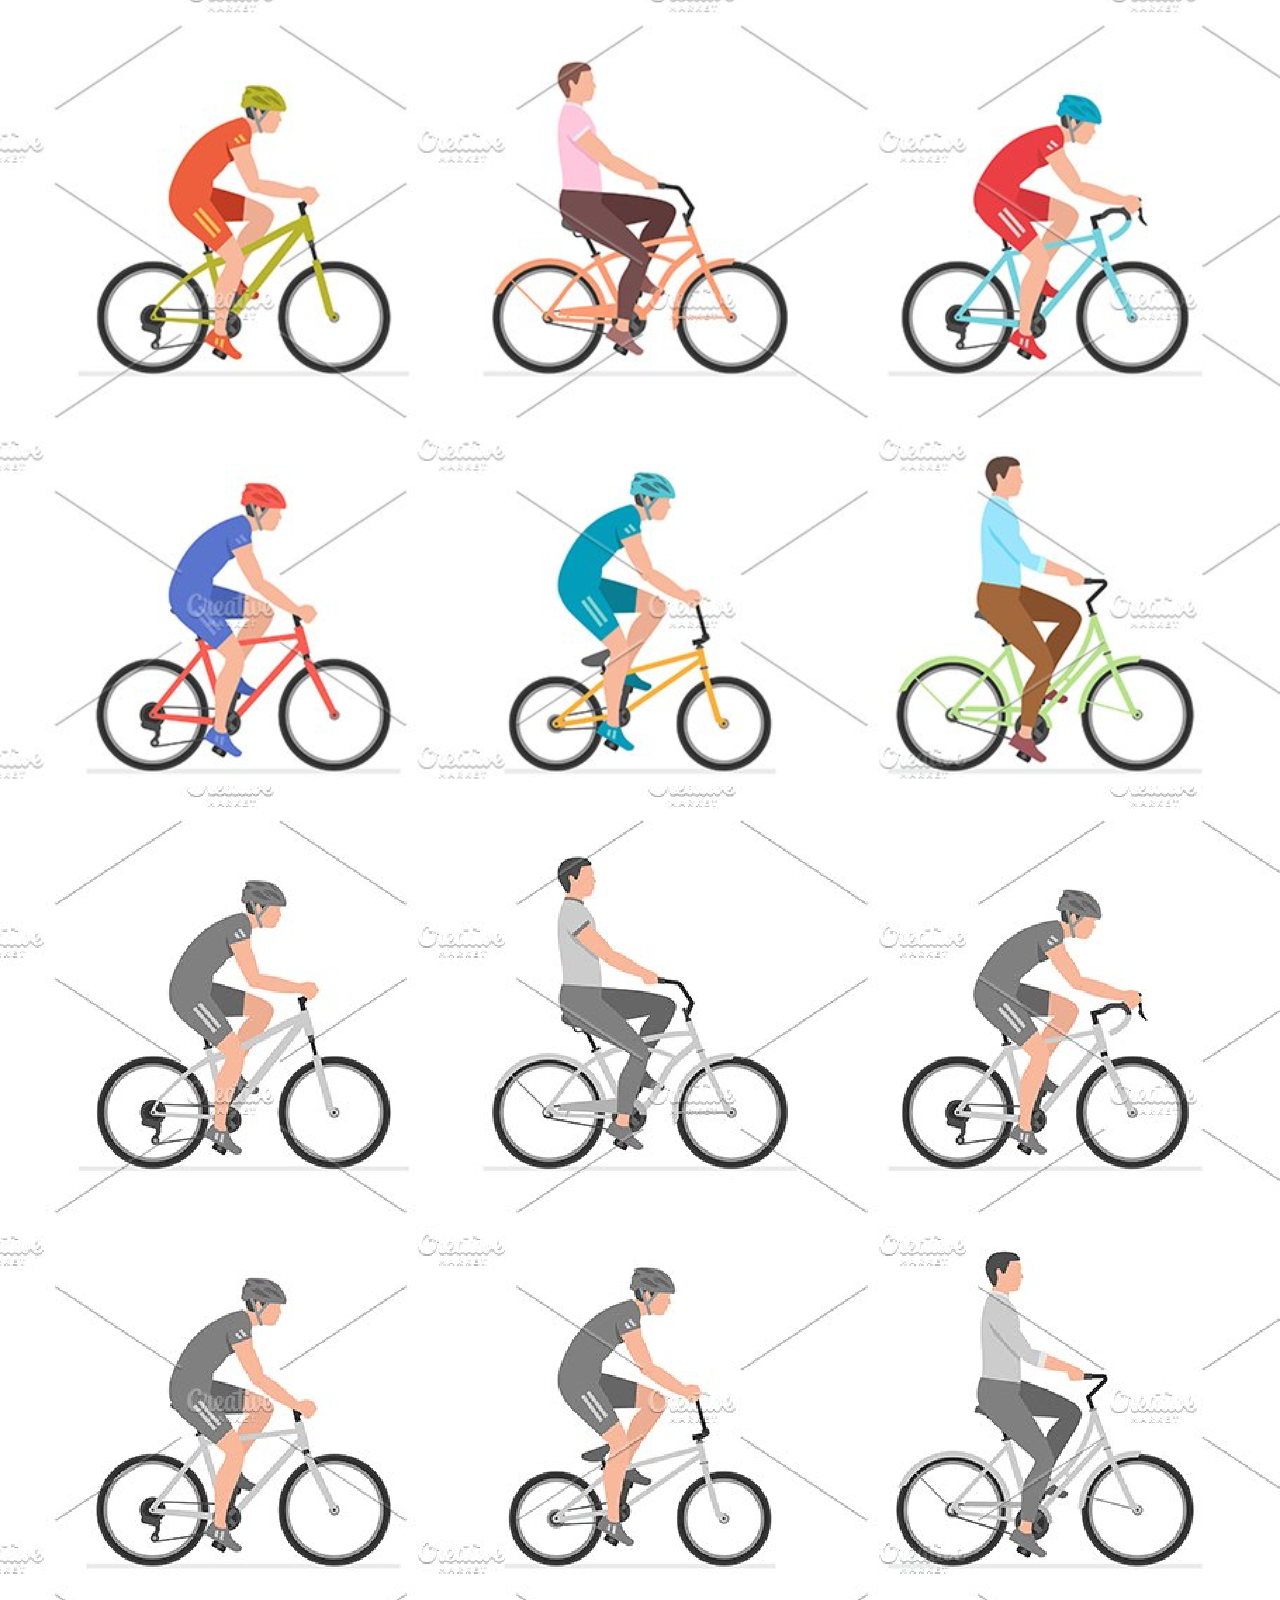 Set of men riding bicycles pinterest image preview.